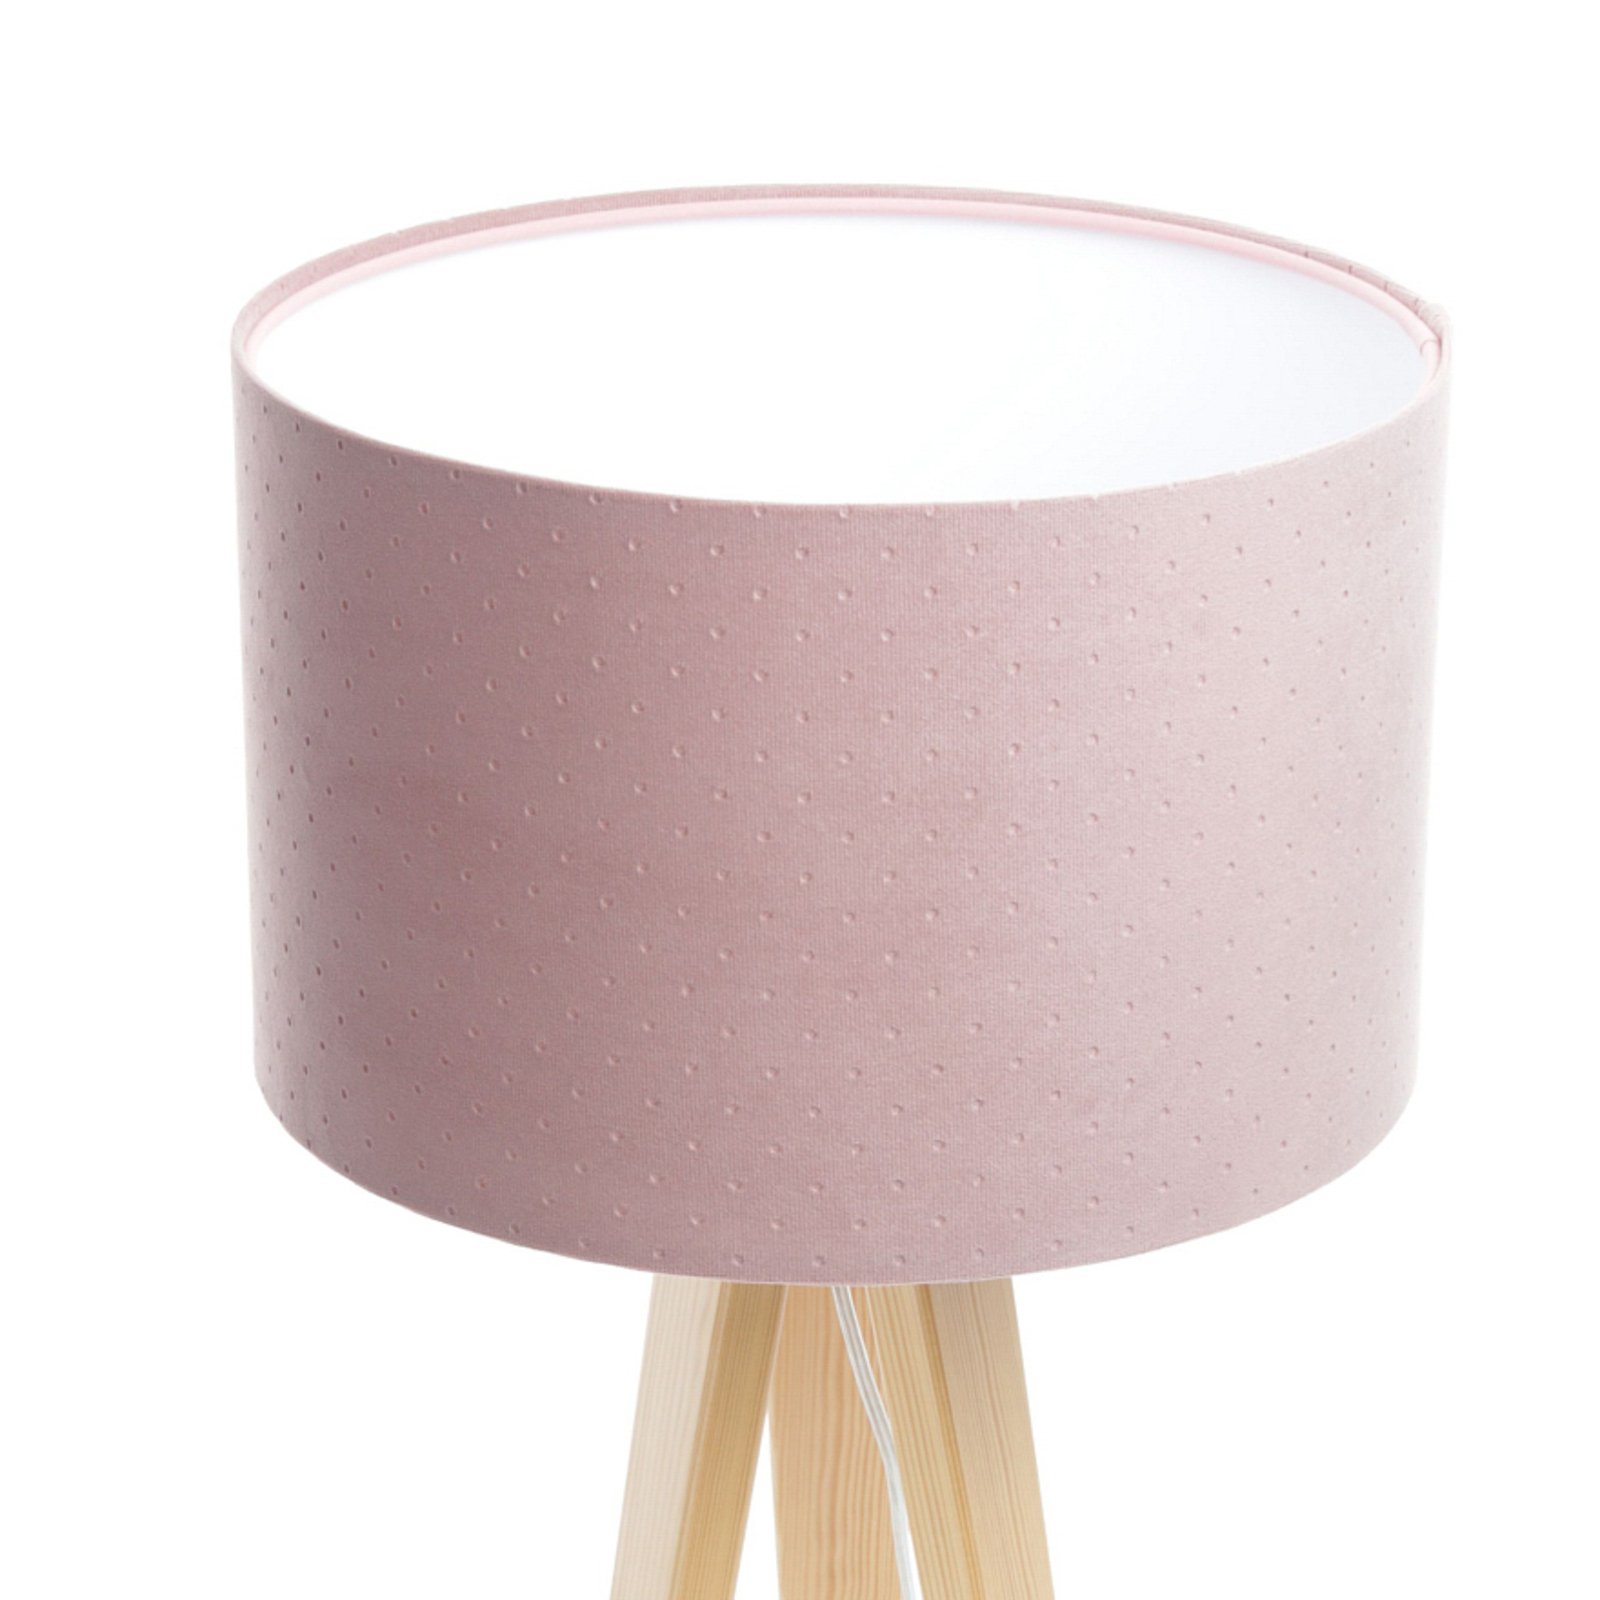 Rosabelle tripod table lamp, pink/natural